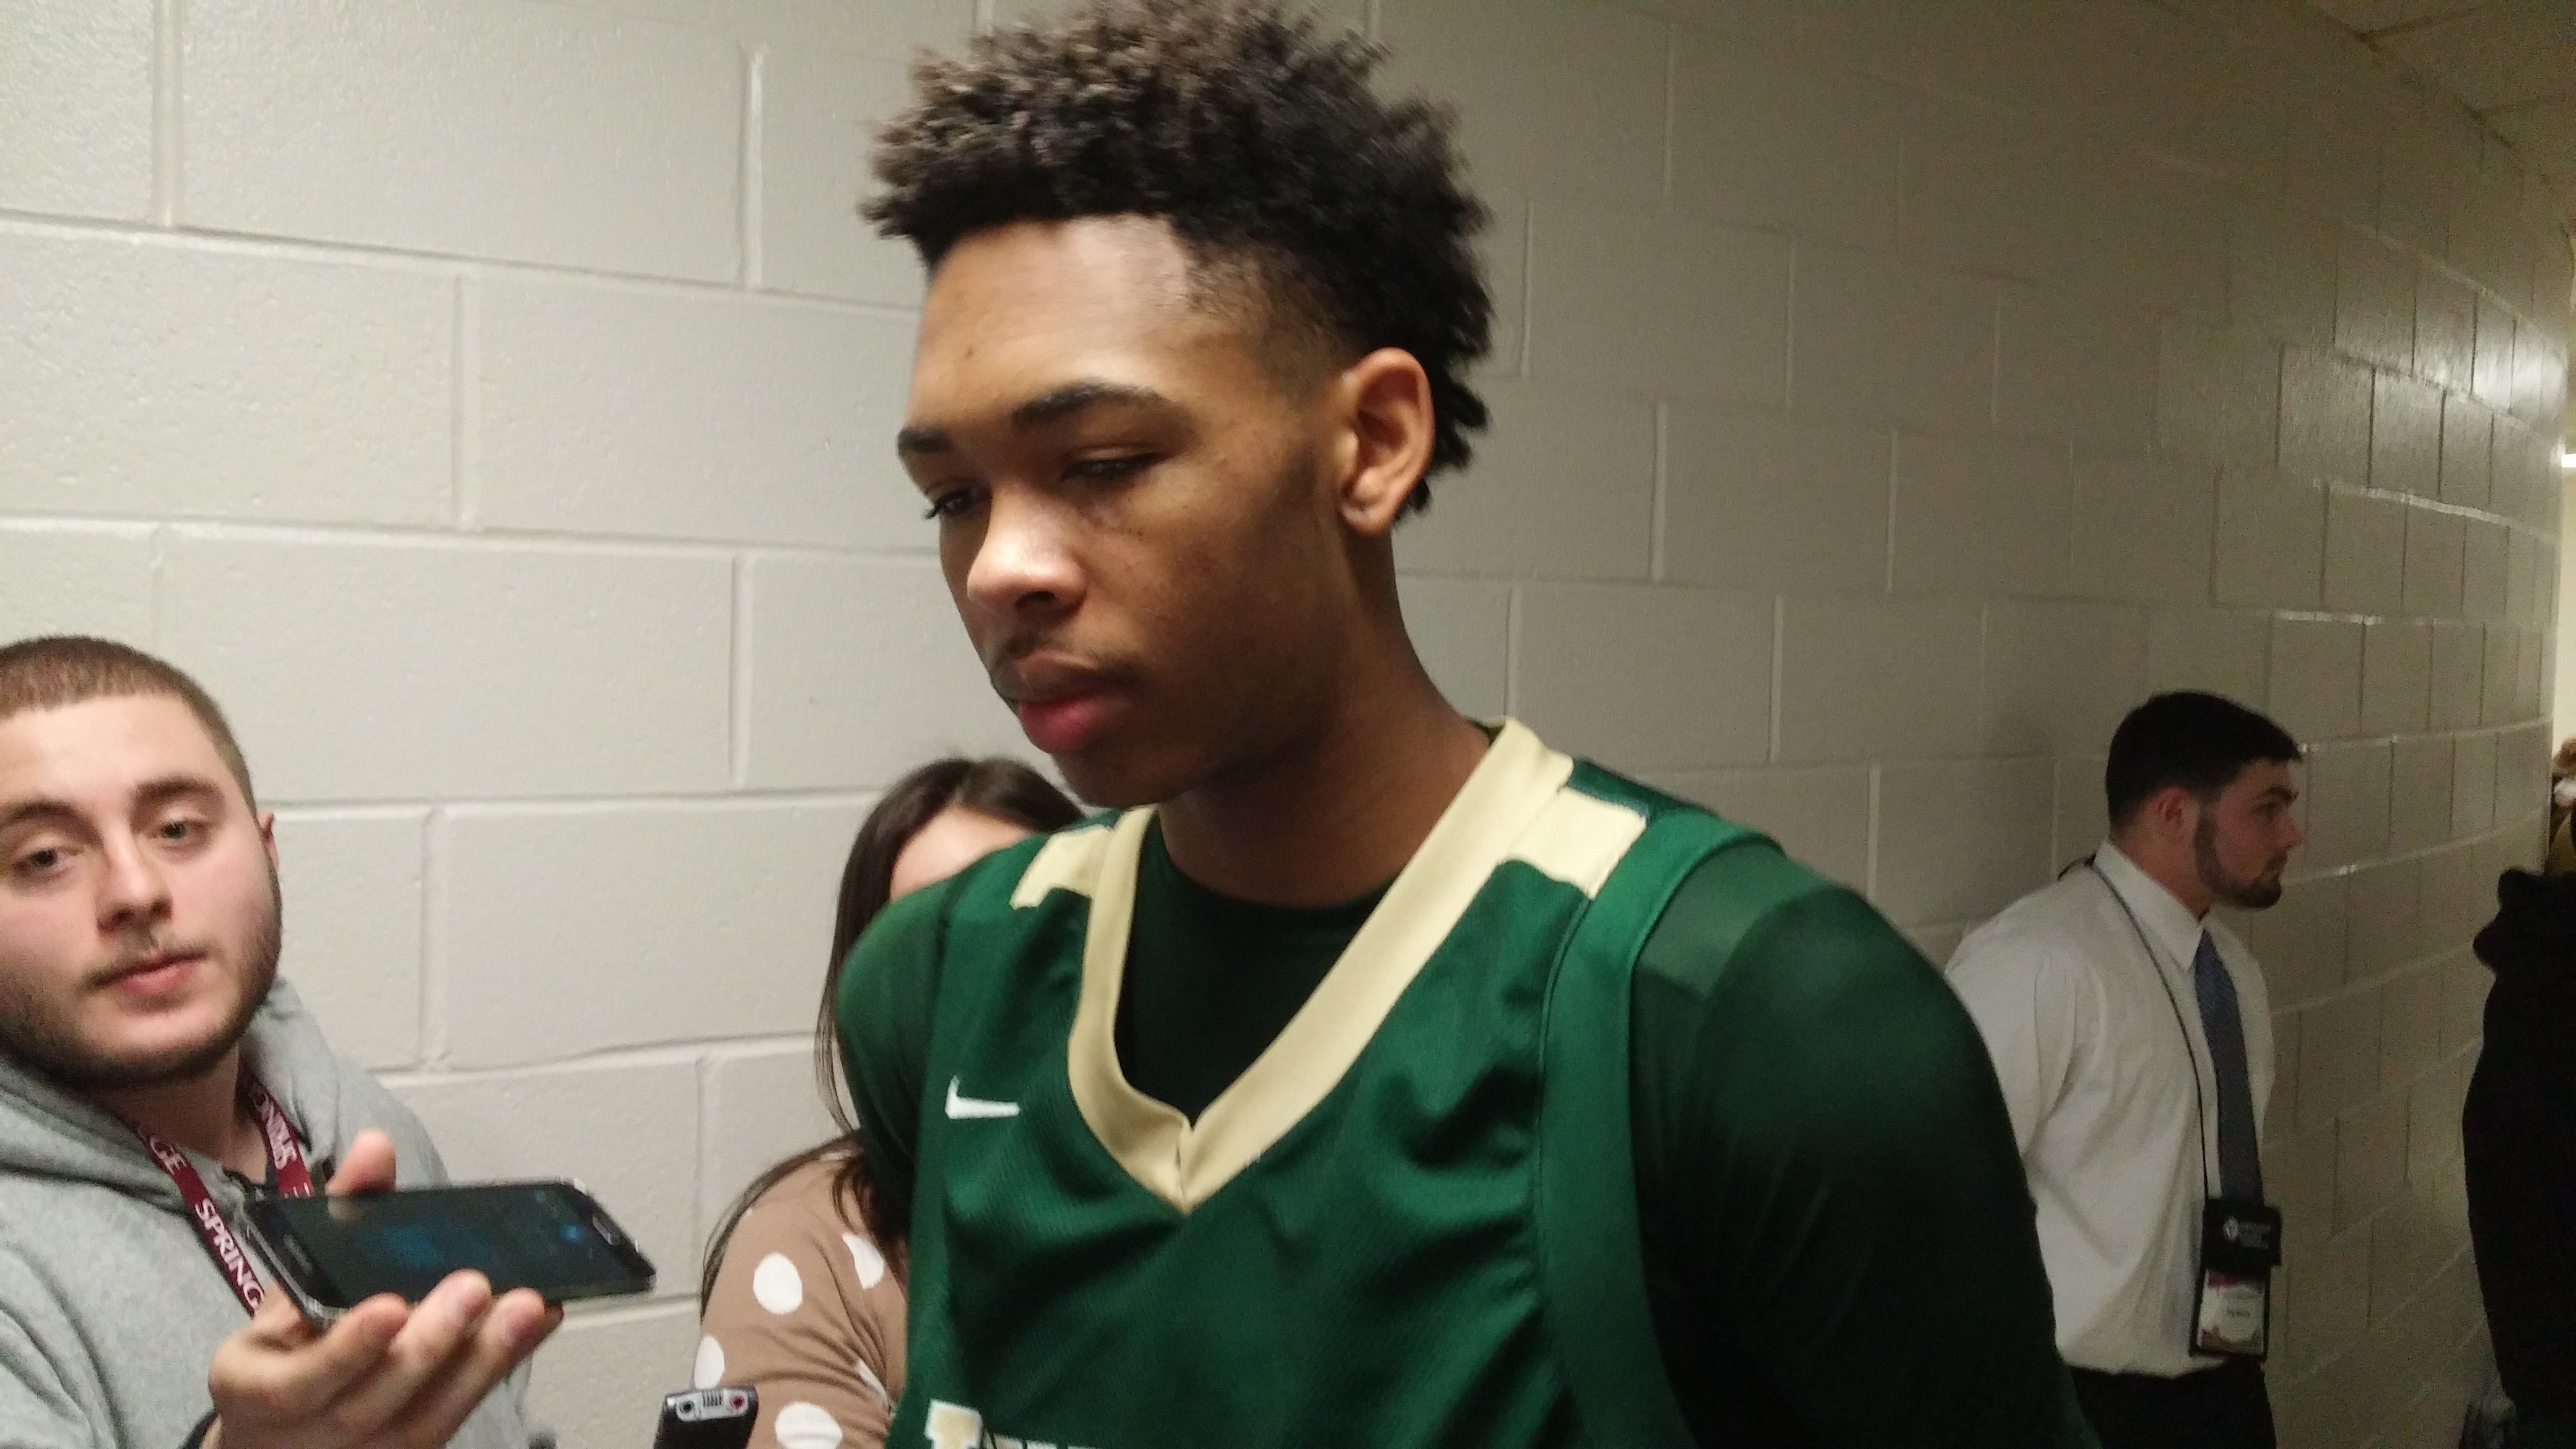 Brandon Ingram had 25 points, seven rebounds and four assists to lead Kinston, N.C., to a 56-54 defeat of Trenton (N.J.) Catholic at the Spalding Hoophall Classic. Photo by Jim Halley